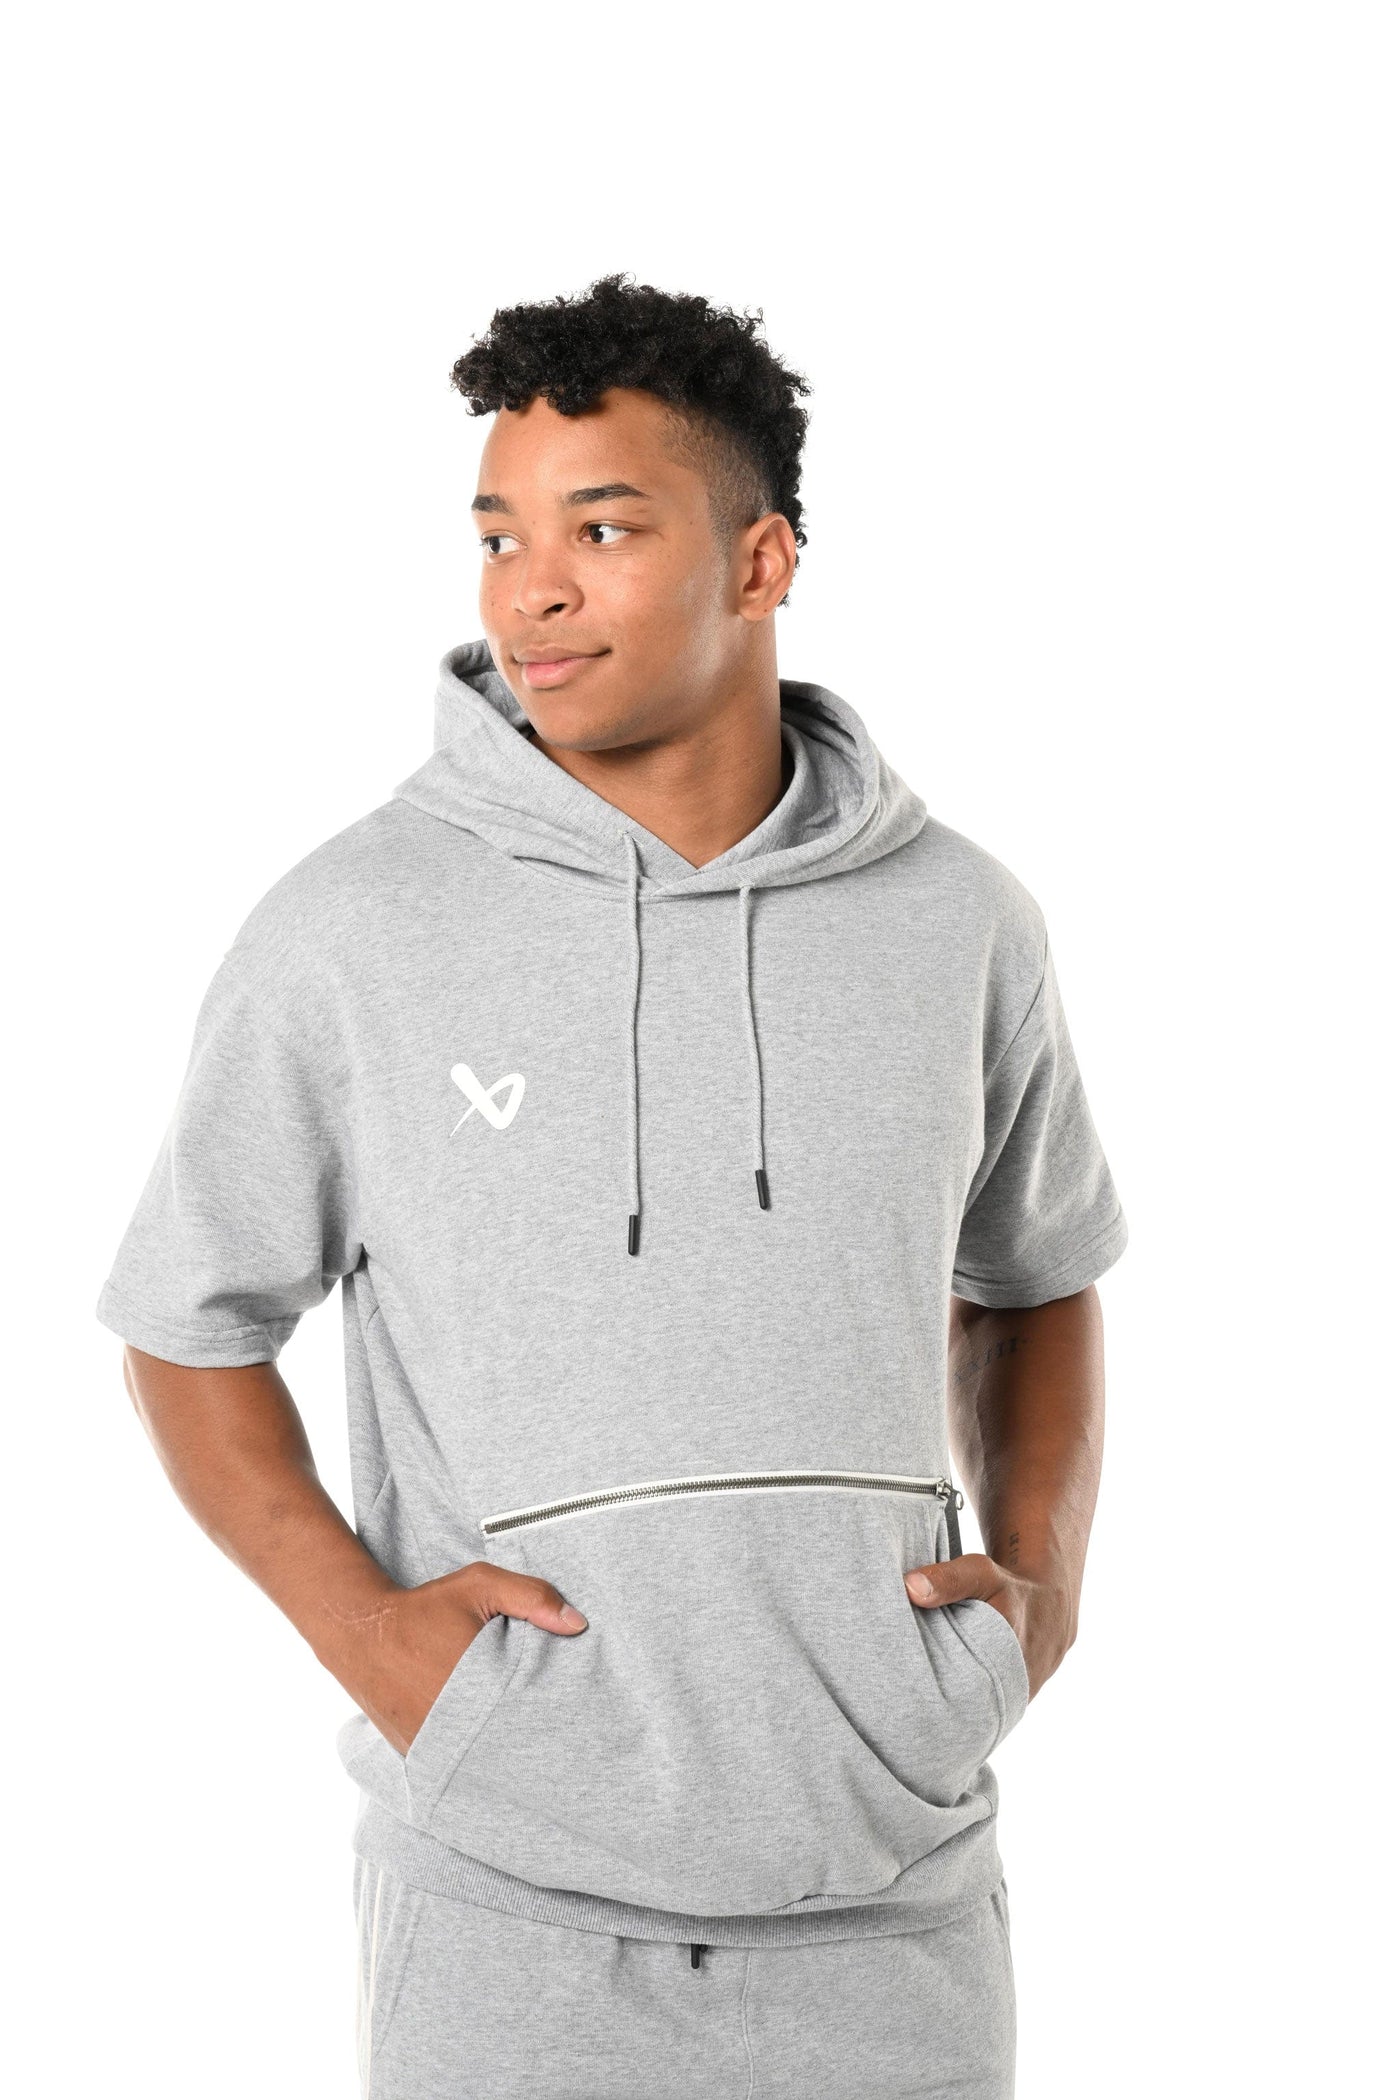 Bauer FLC Shortsleeve Mens Hoody - The Hockey Shop Source For Sports